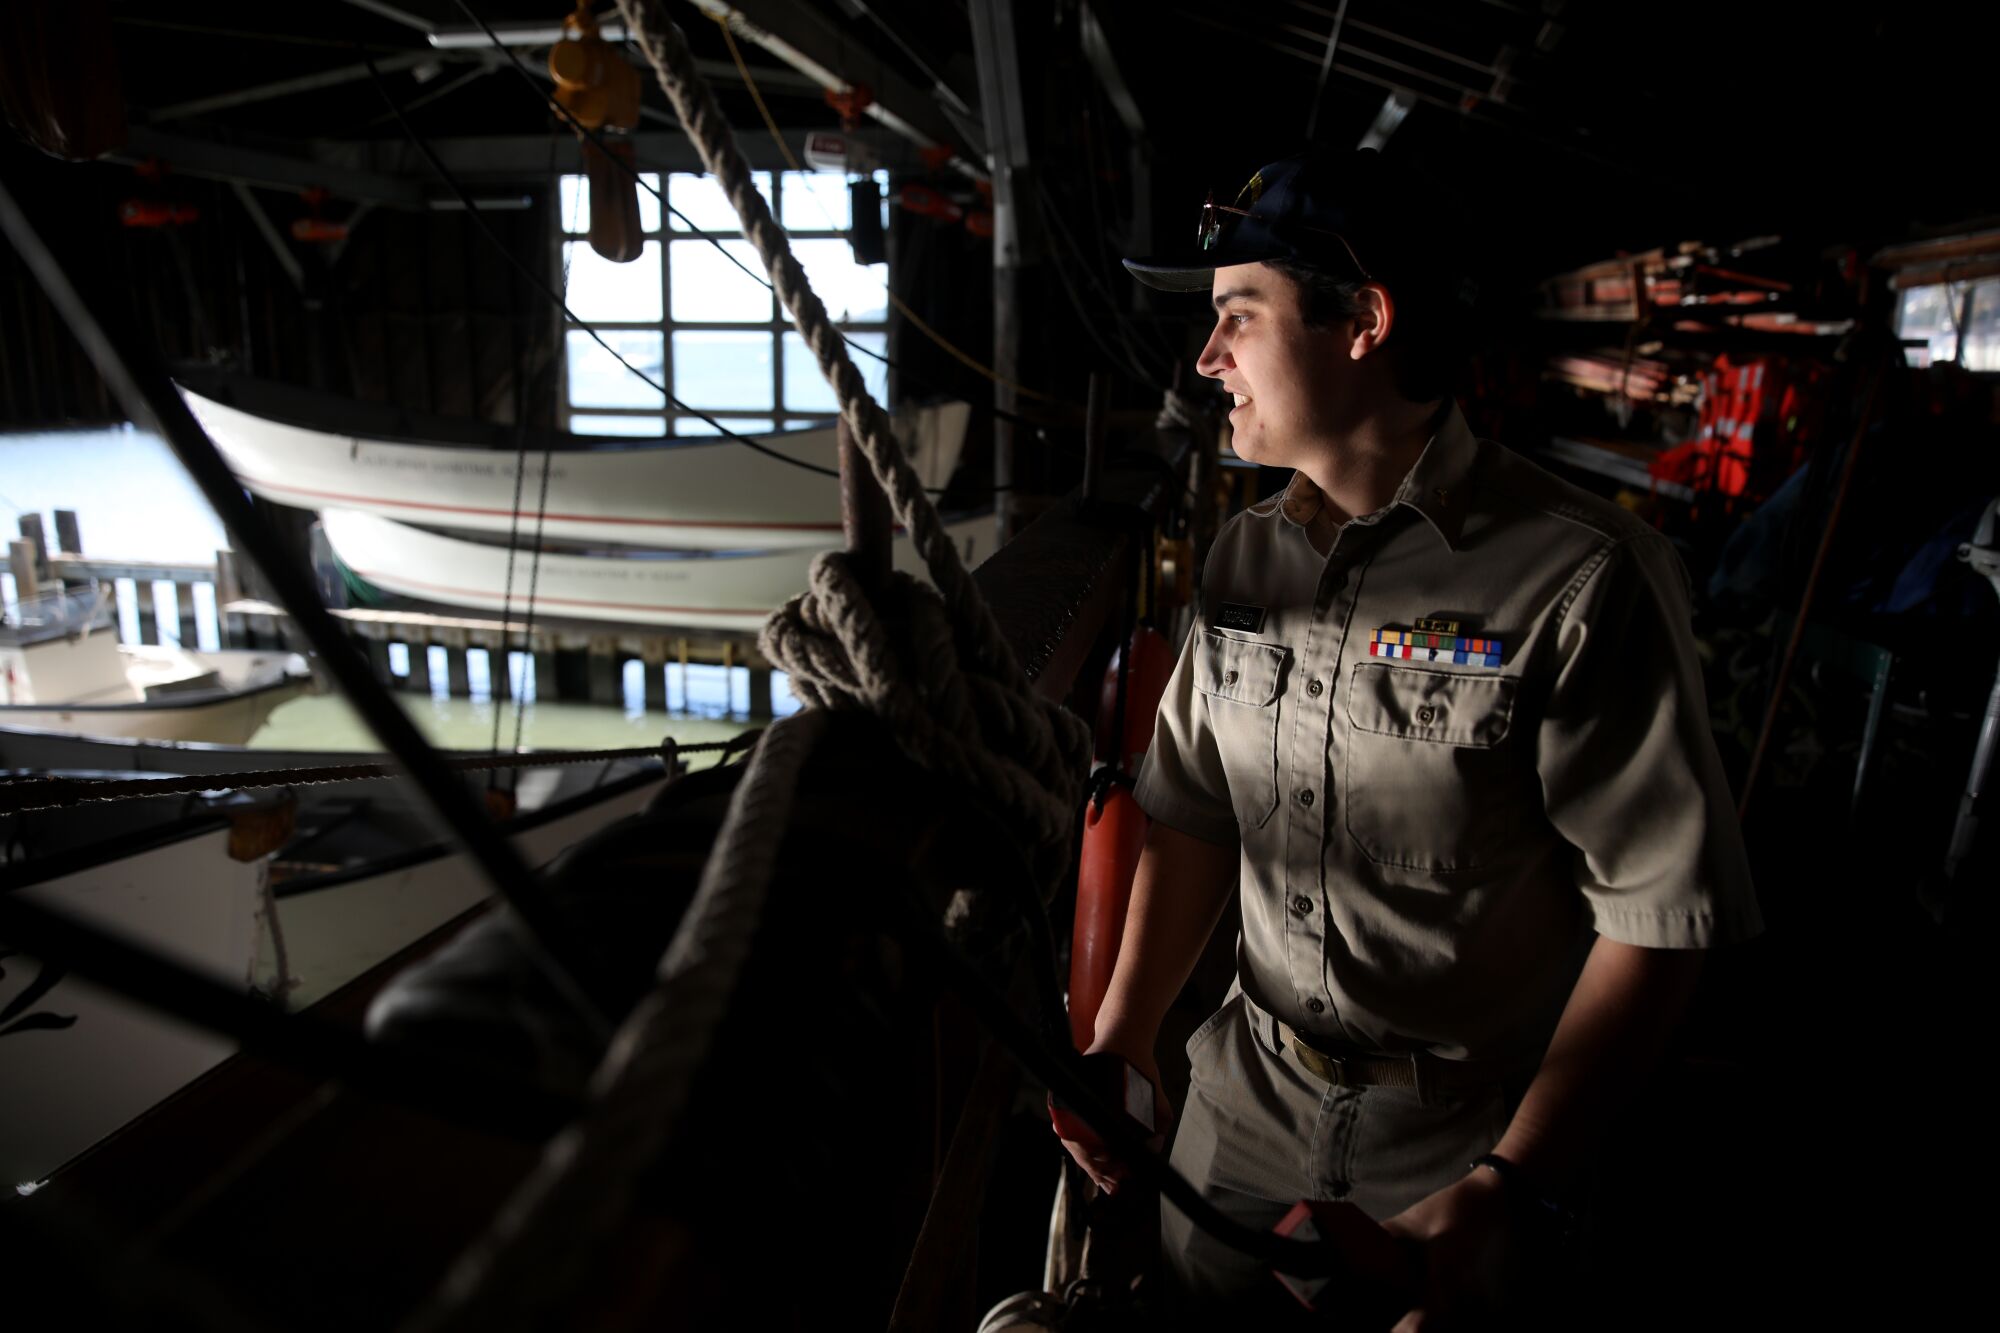 cadet sophie scopazzi, a senior majoring in marine transportation at the maritime academy, in the boat house 